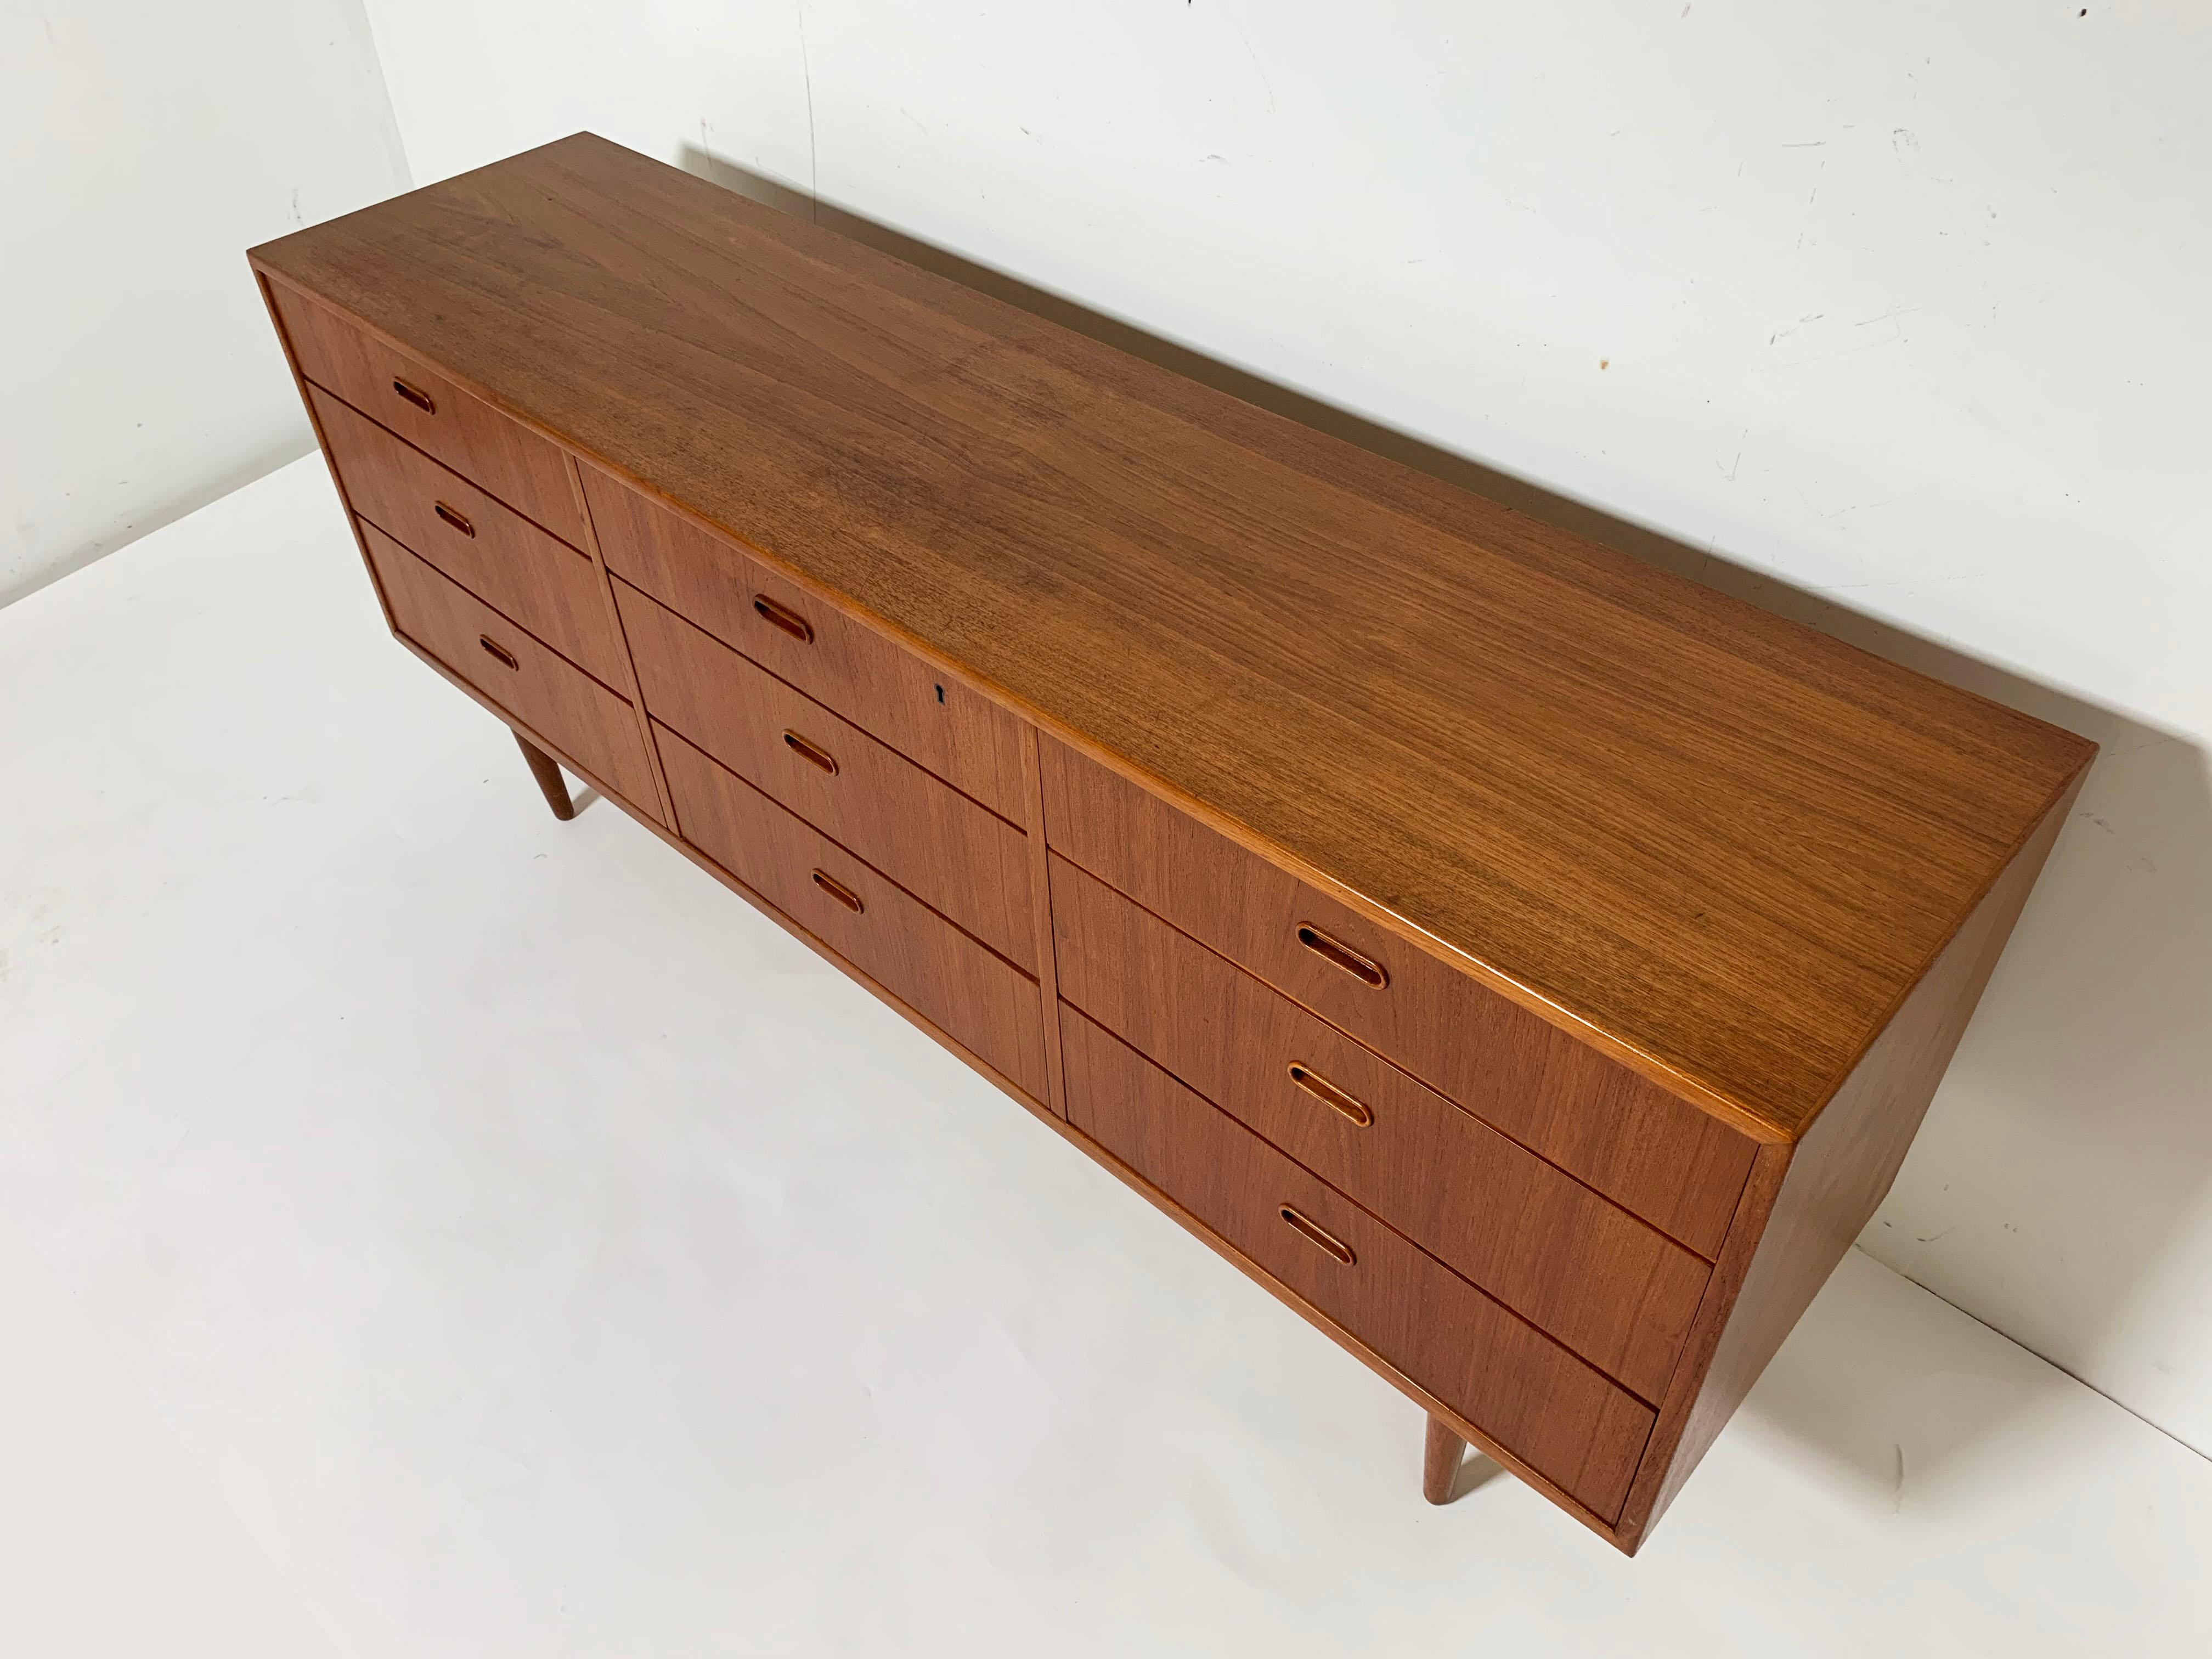 Teak nine-drawer dresser by Falster, Denmark, circa 1960s. Often attributed (erroneously, we believe) to Arne Vodder, much more likely designed by Arne Wahl Iversen, who is documented to have created other furniture with these distinctive handles